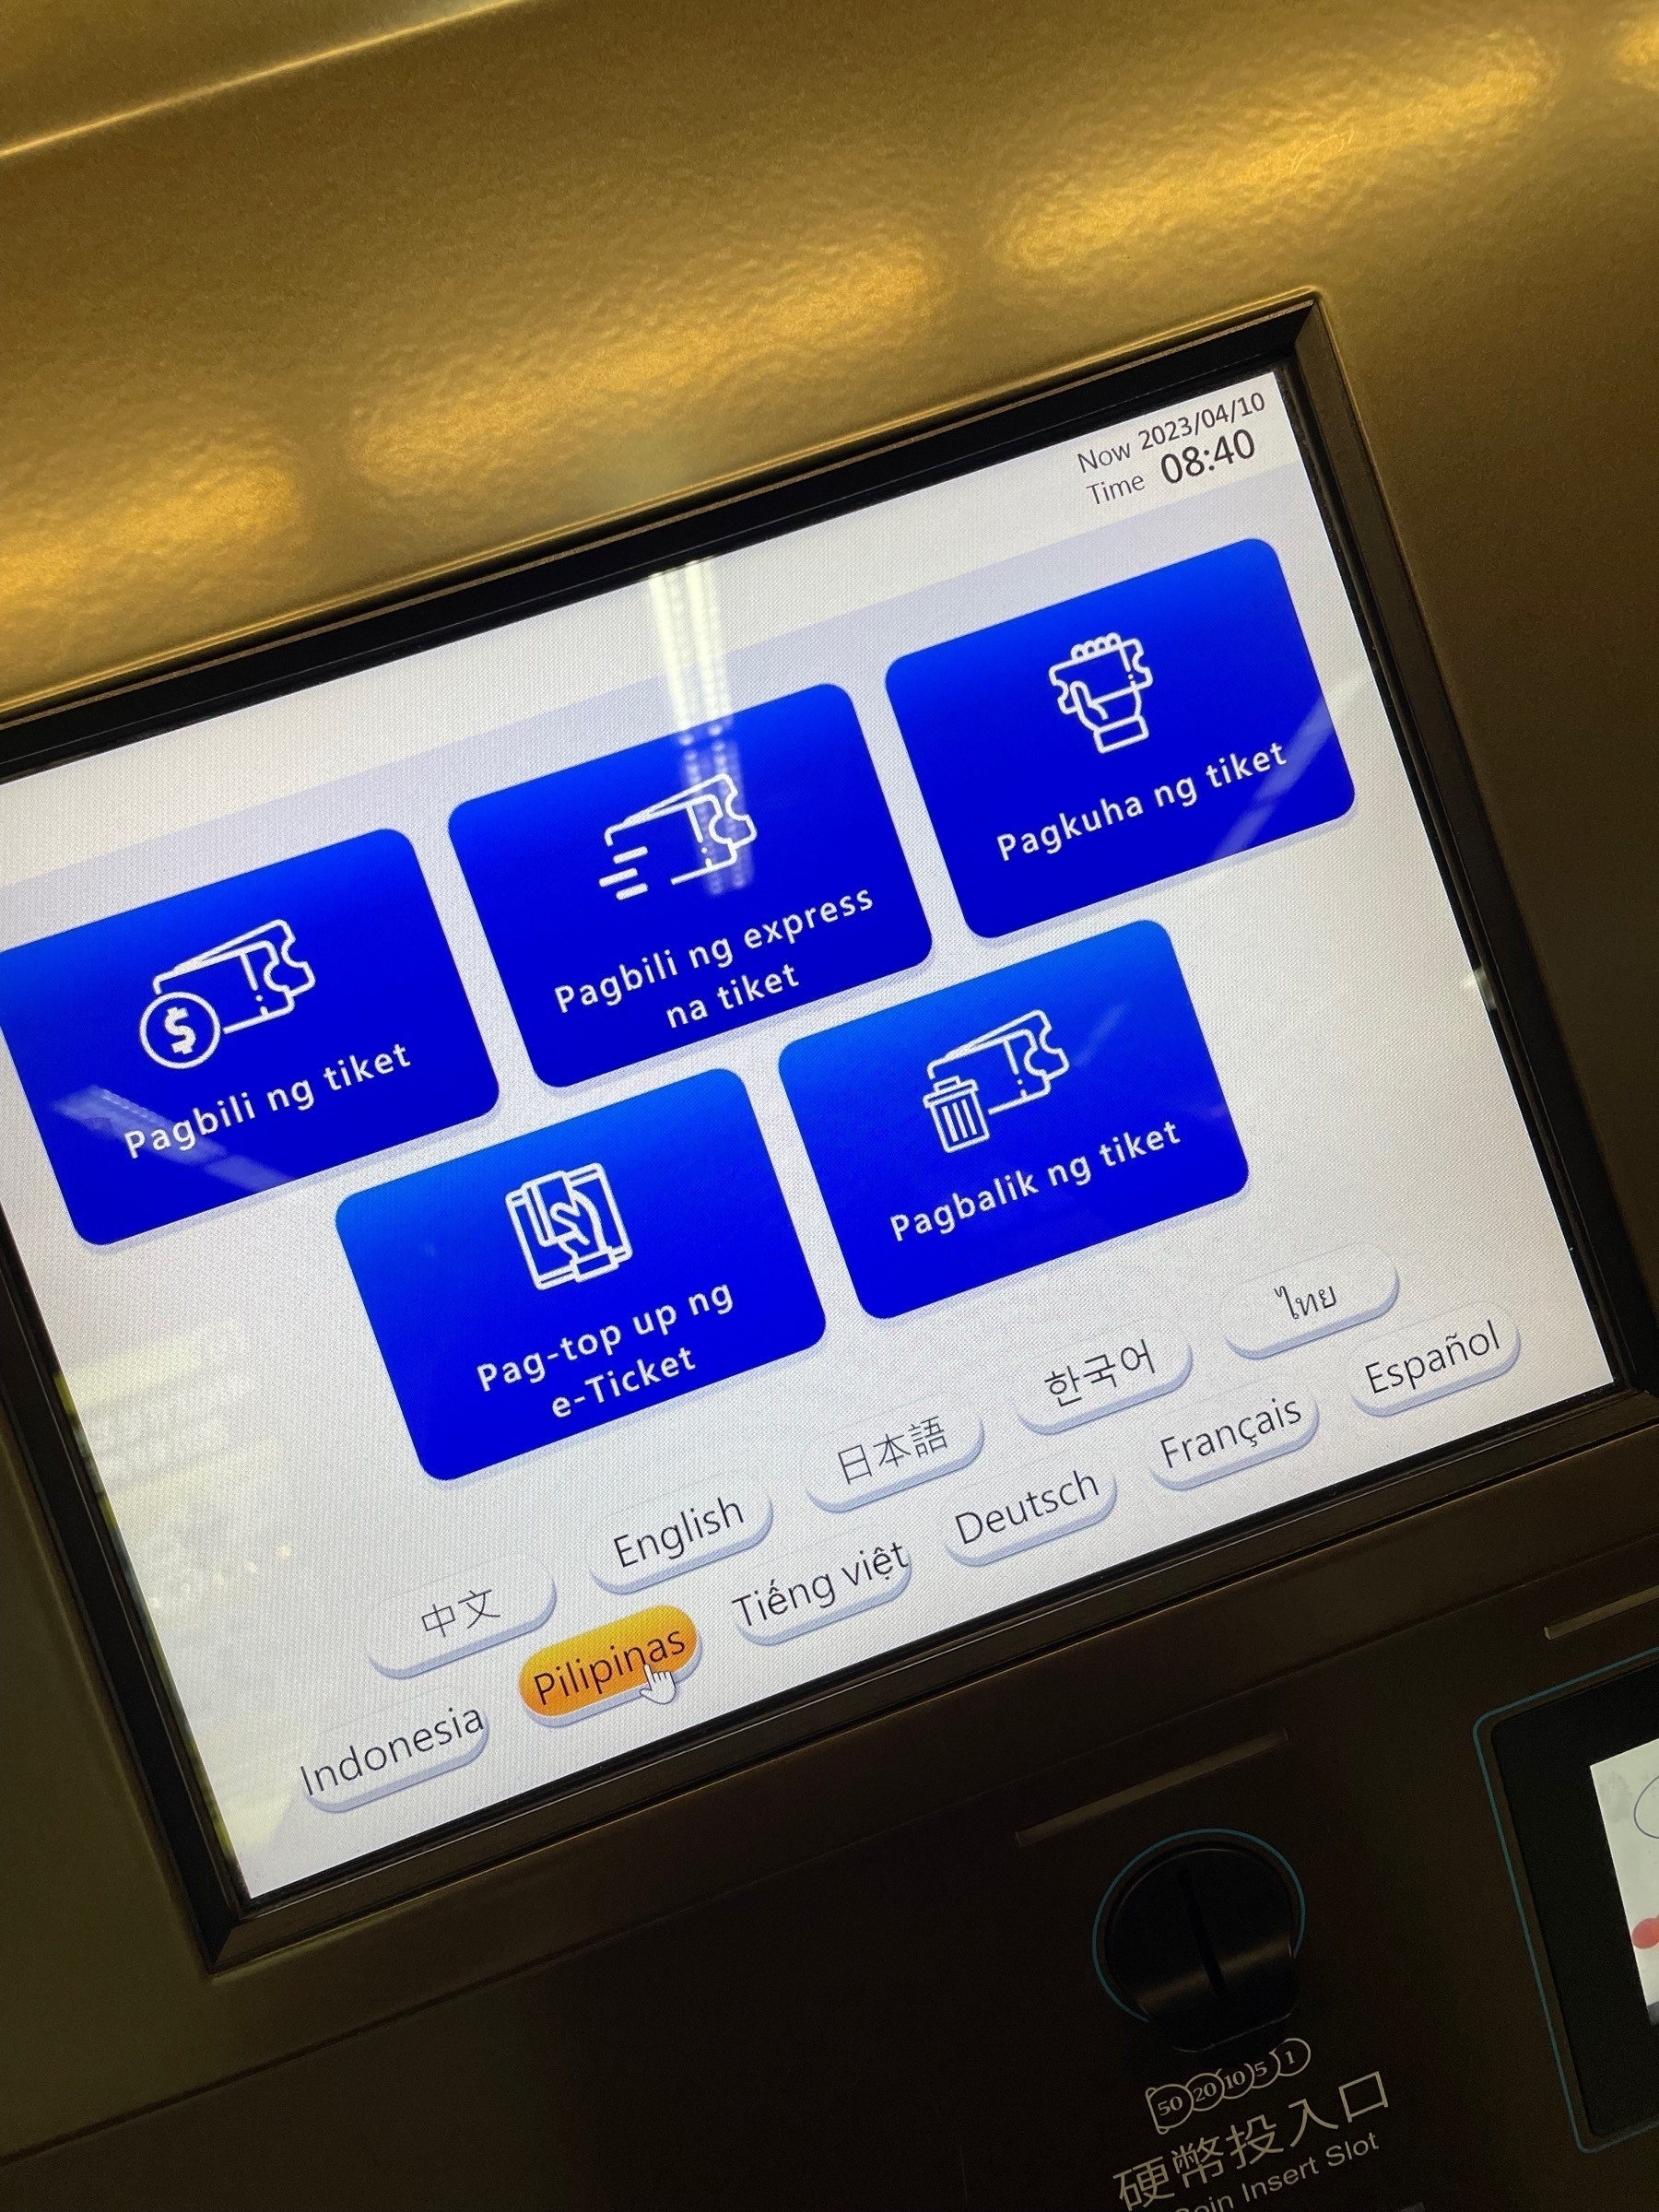 Interface of the easycard reloading and ticket buying machine in Taiwan. The language currently selected and shown on screen is Filipino, and the labels for all buttons are all translated as such. Other options available are: Chinese, English, Japanese, Korean, Thai, Indonesia, Vietnamese, German, French, and Spanish.